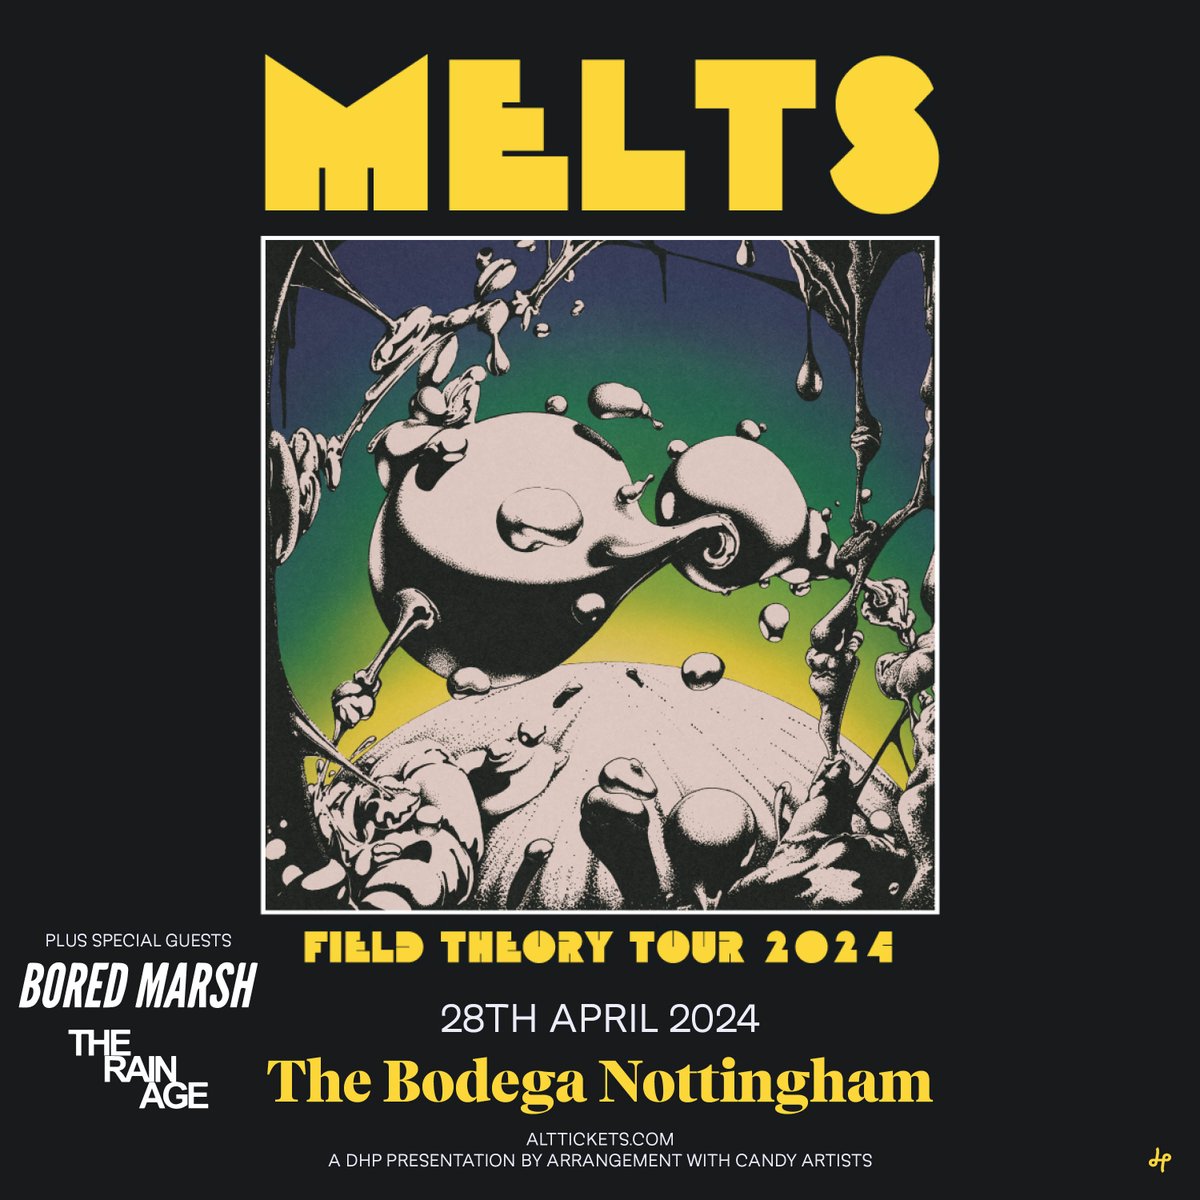 SUPPORT/ Joining fast-rising Dublin band @wearemelts at @bodeganotts next month are @BoredMarsh and The Rain Age! Get your tickets: tinyurl.com/5cepf993